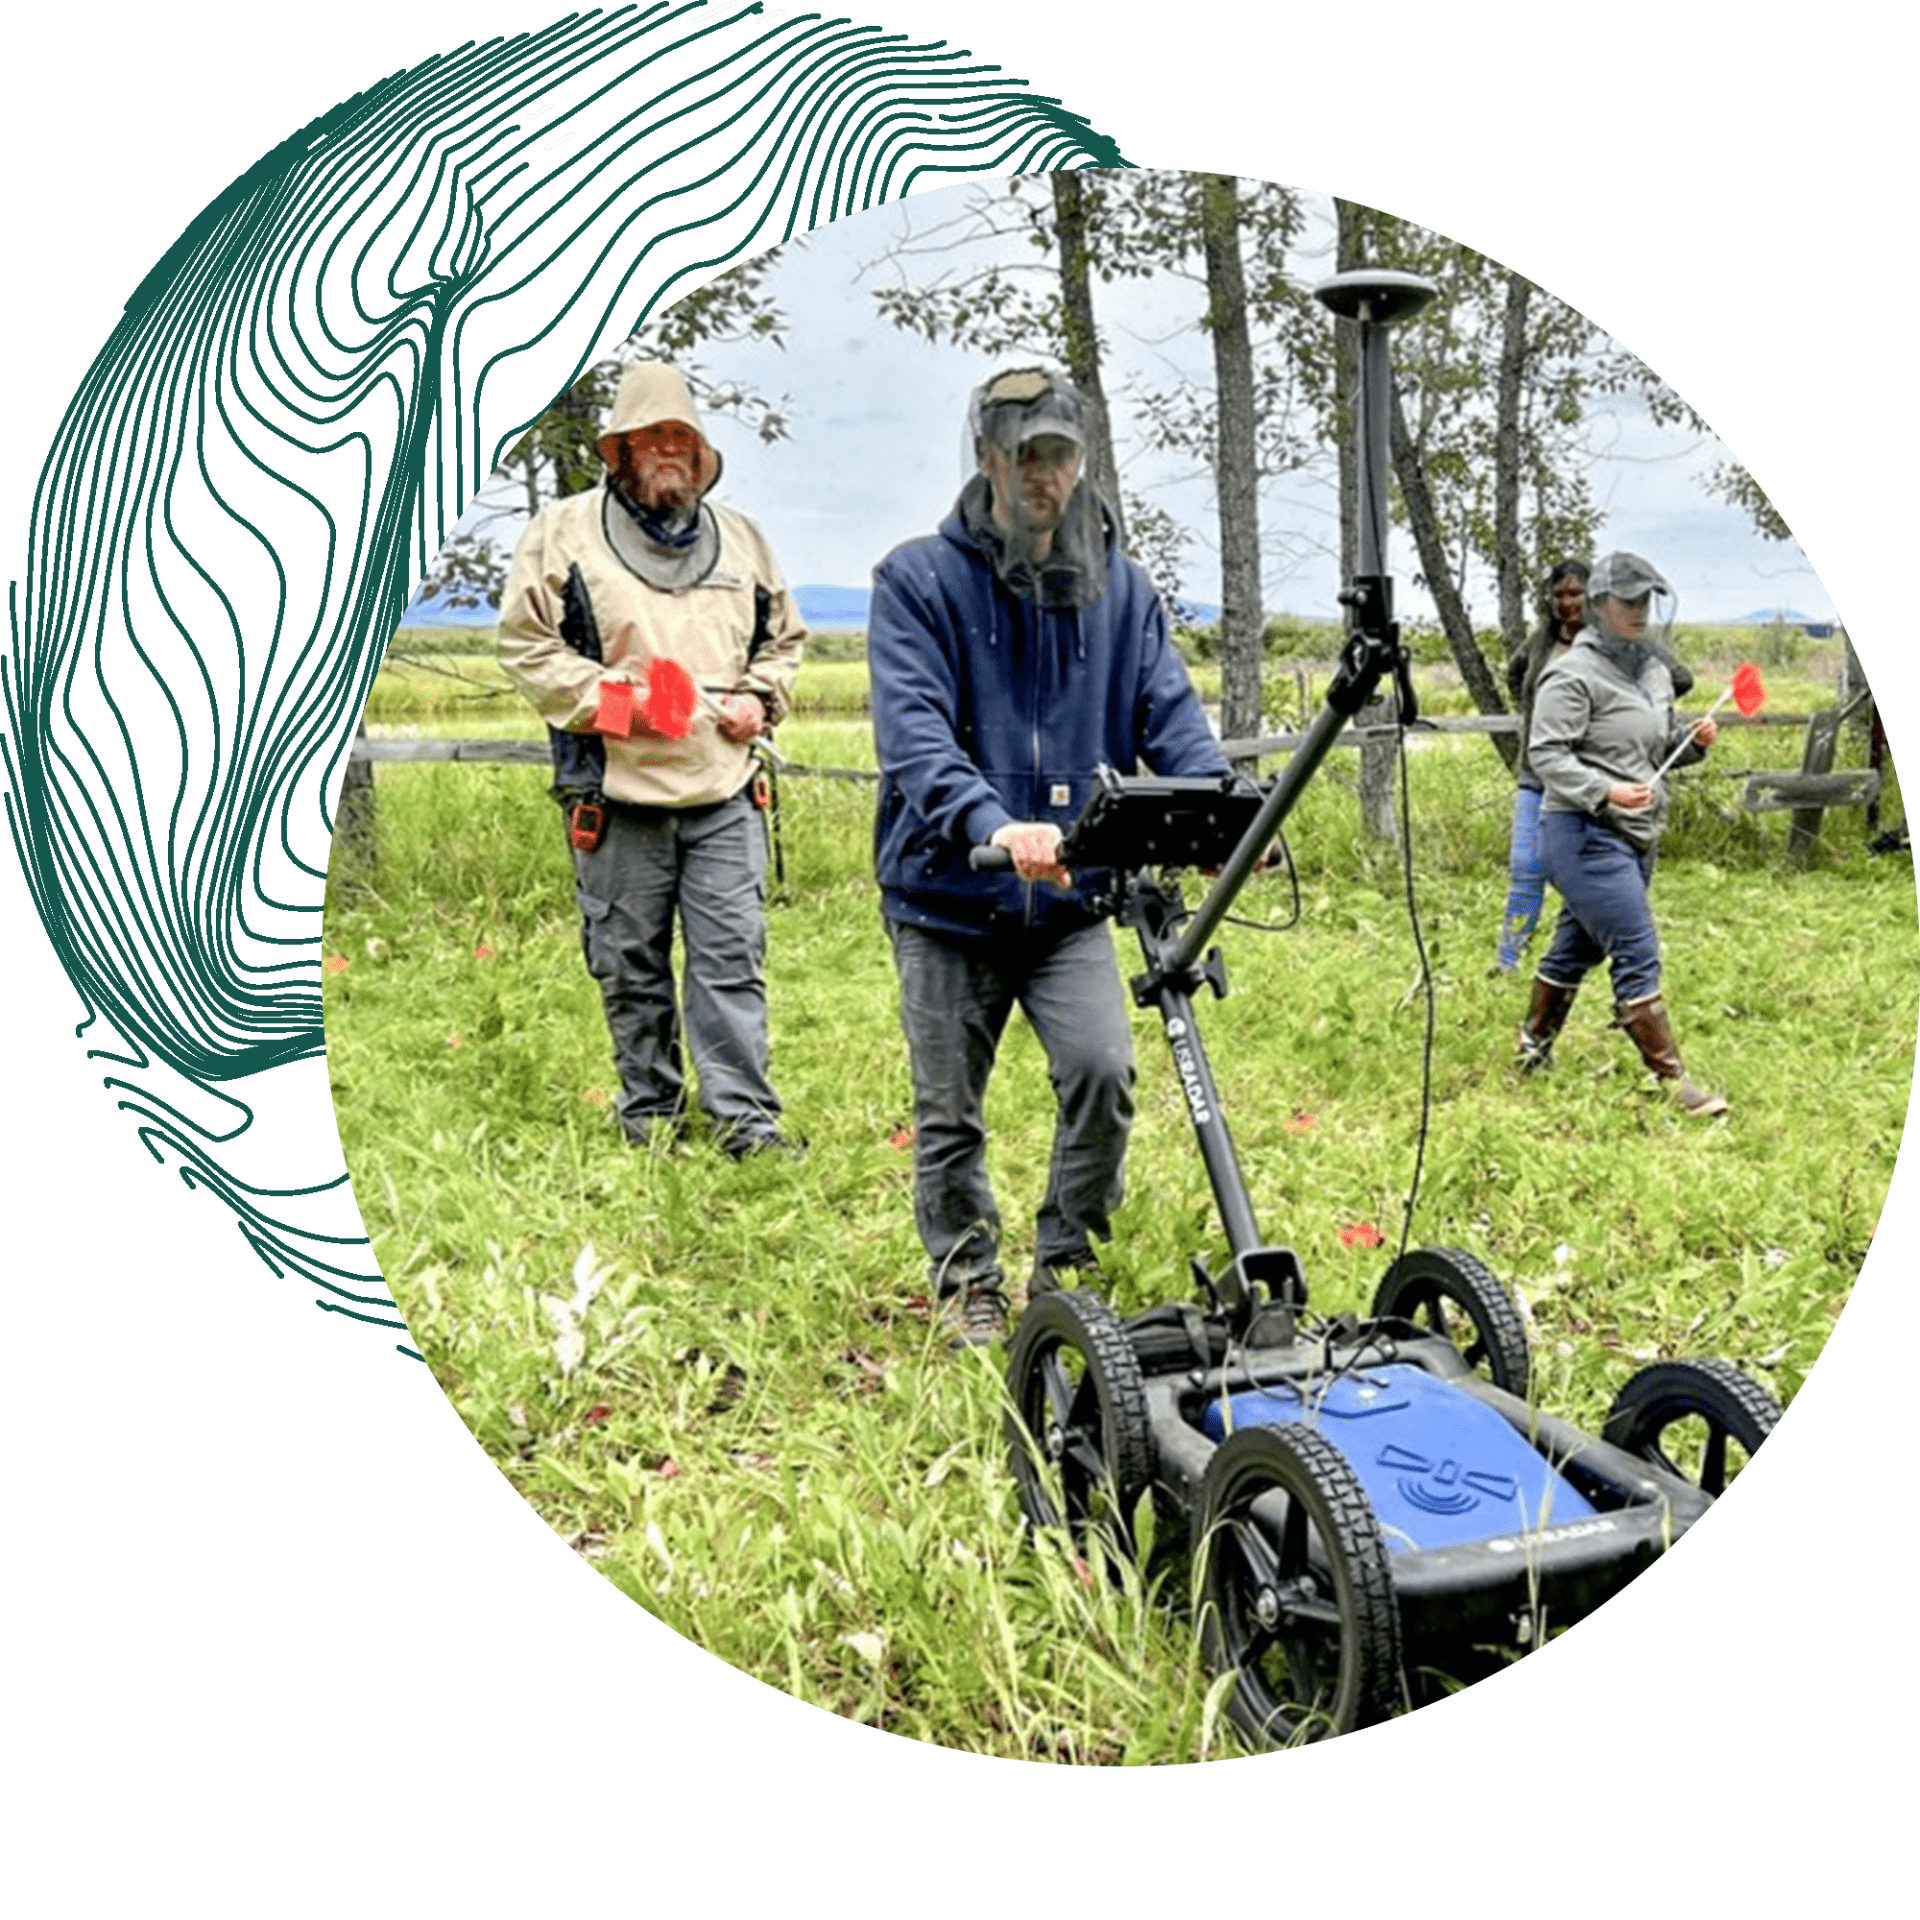 Thomas Urban, research scientist in the College of Arts and Sciences, uses ground-penetrating radar to search for communal graves at Pilgrim Hot Springs in Alaska, in collaboration with employees of the National Park Service and Kawerak, Inc.